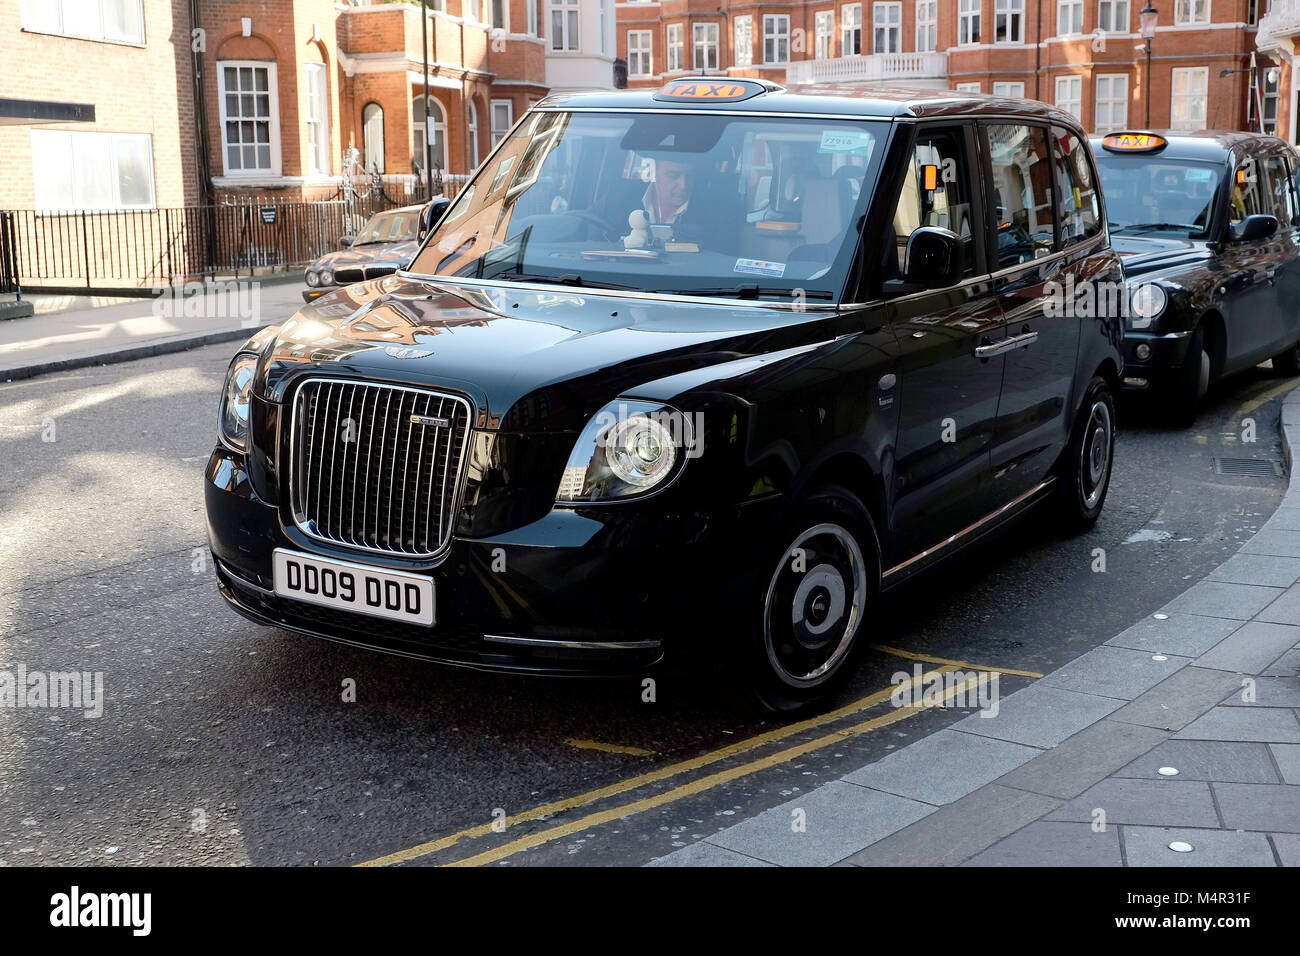 London's black cab has gone green as a new electric taxi waits outside Harrods in Knightsbridge to take passengers on the capital's roads. Stock Photo